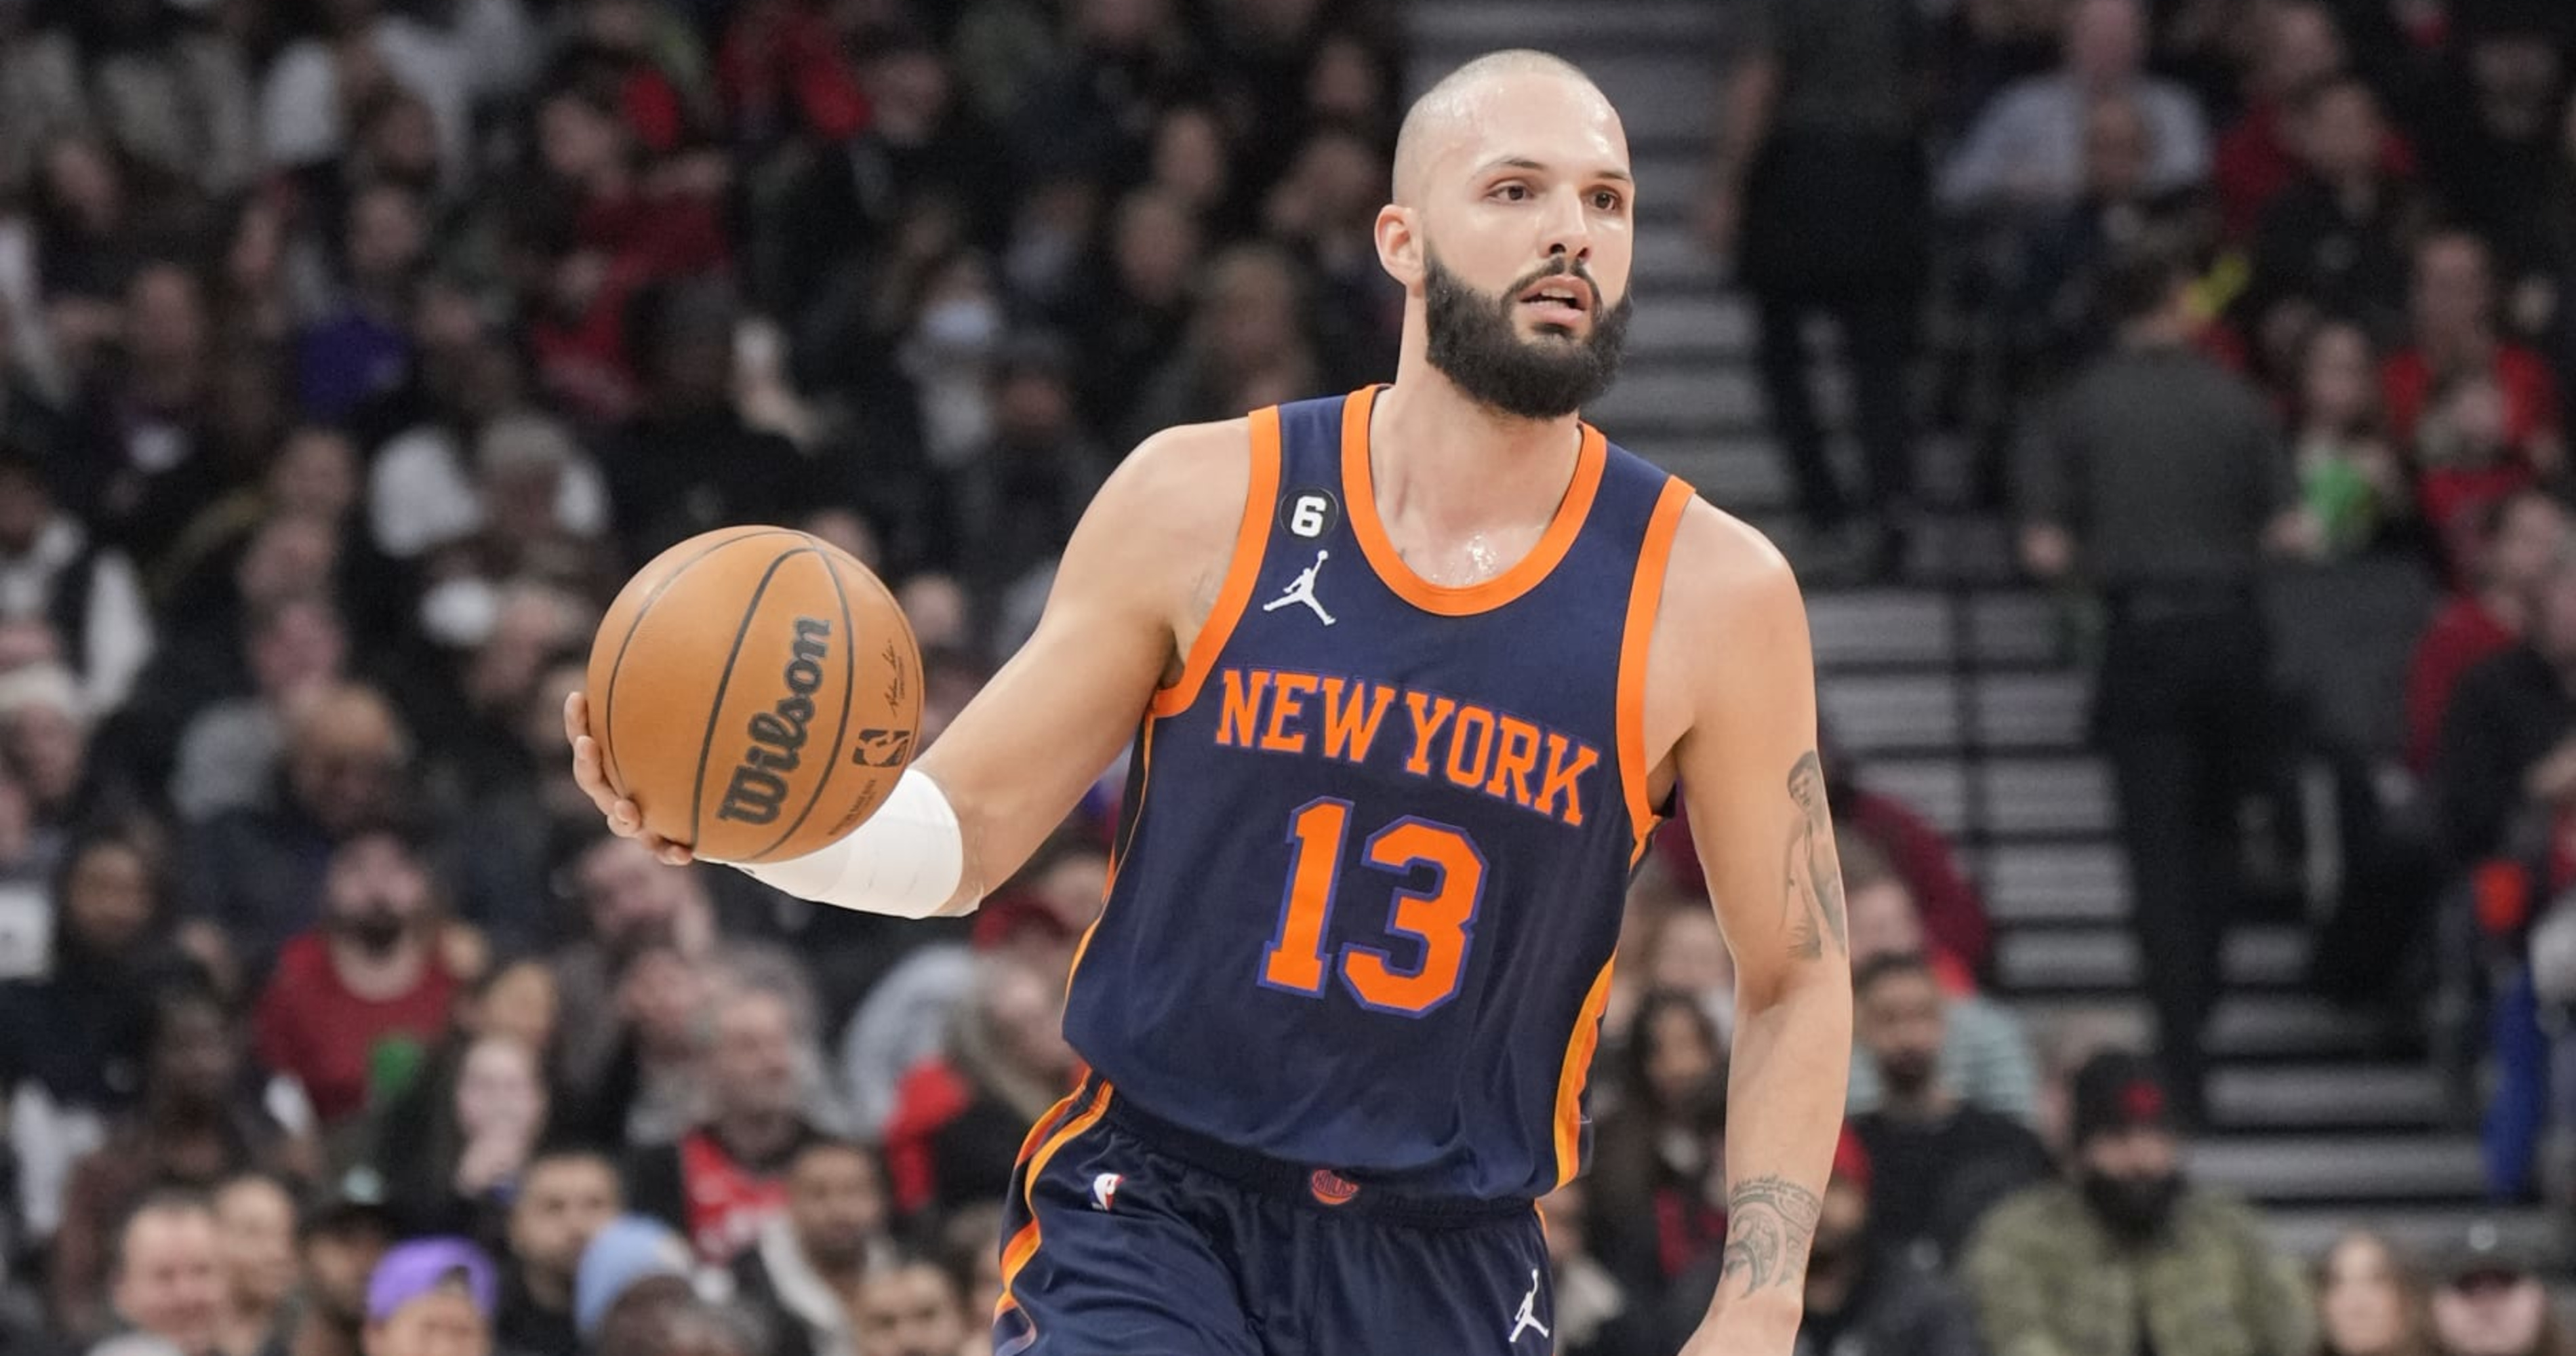 Demotion sends Evan Fournier to the Knicks bench for first time